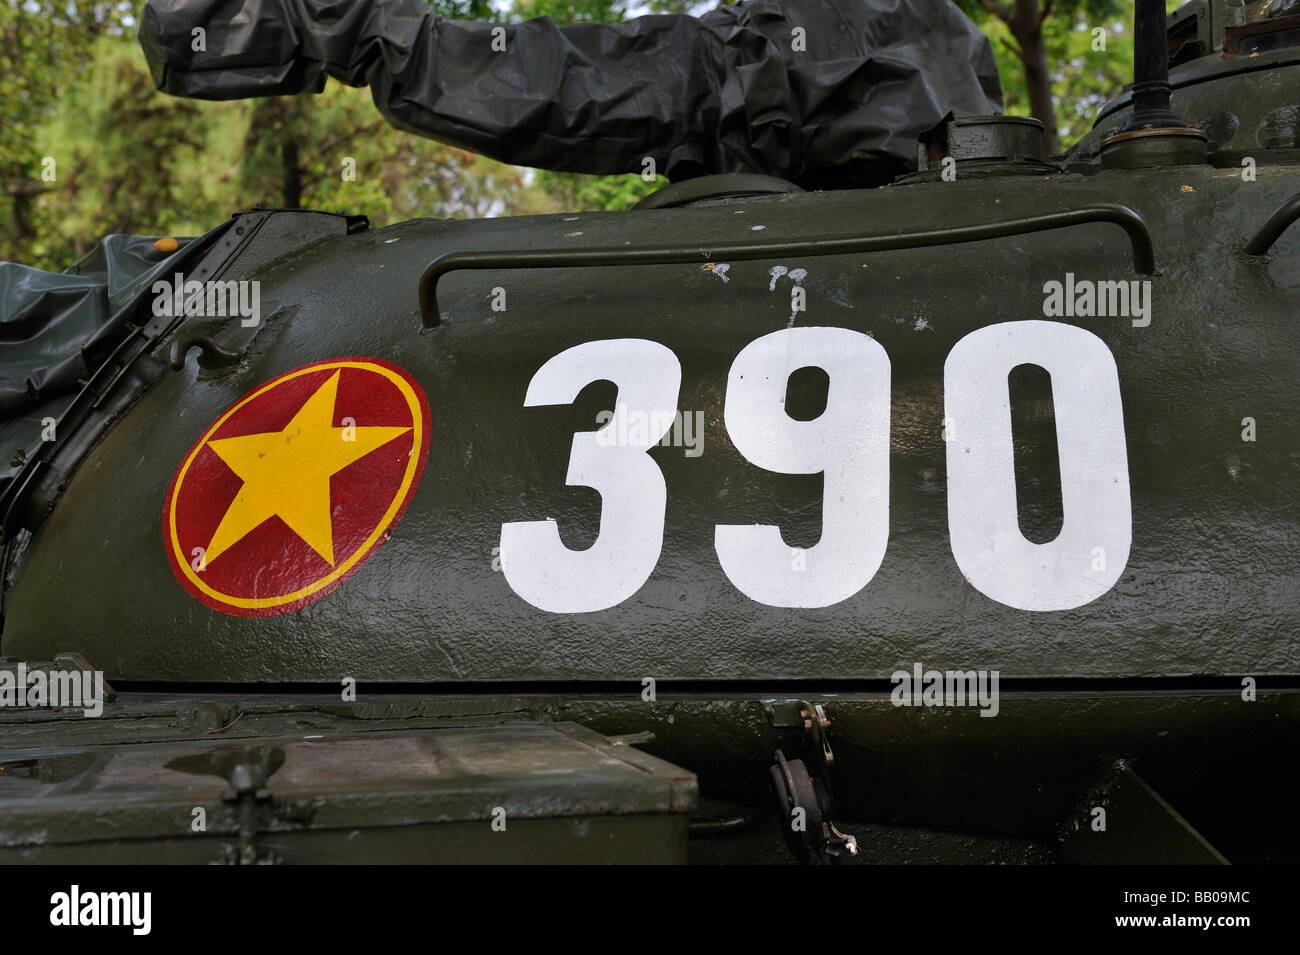 Replica of the T54 tank no. 390 that on 30 April 1975 crashed through the South Vietnamese Presidential Palace's gates. Vietnam Stock Photo